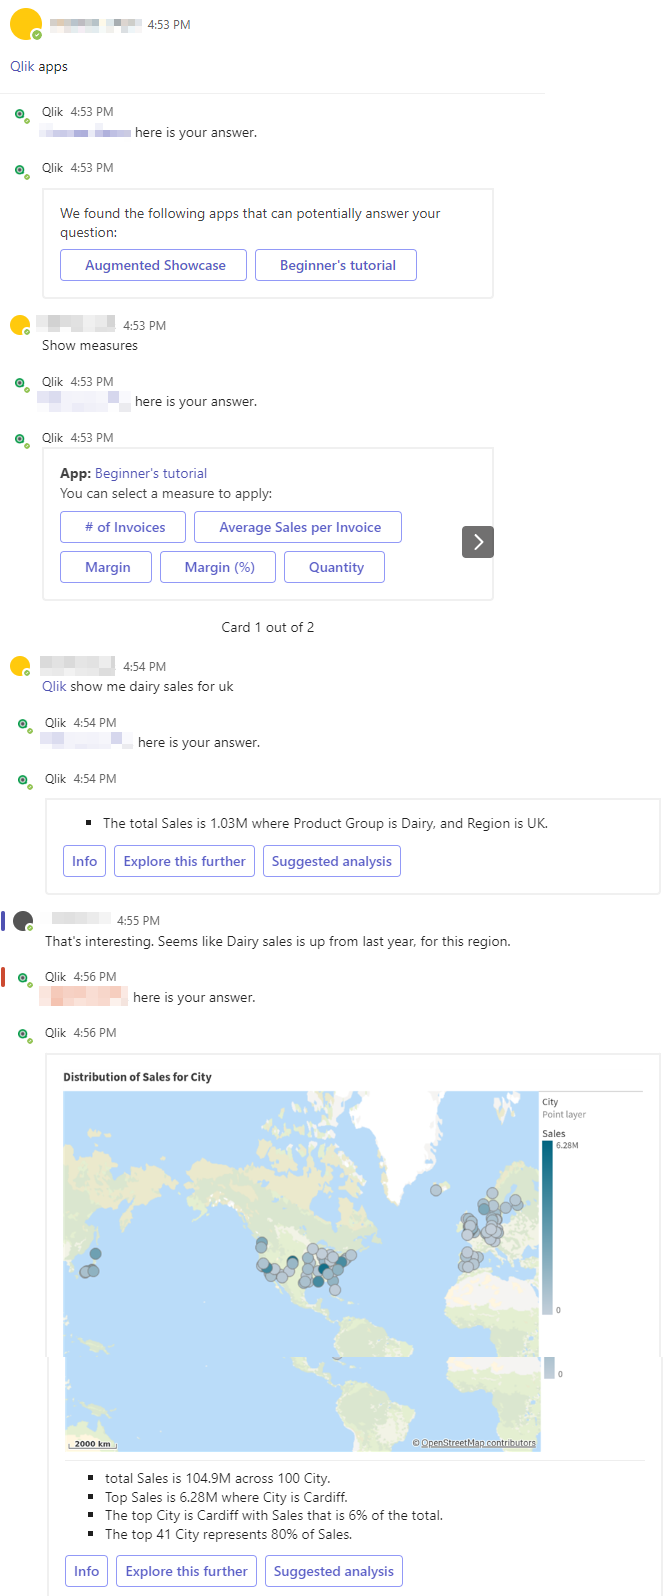 Example of how the Qlik Microsoft Teams bot can be used in a team channel for group interactions with data